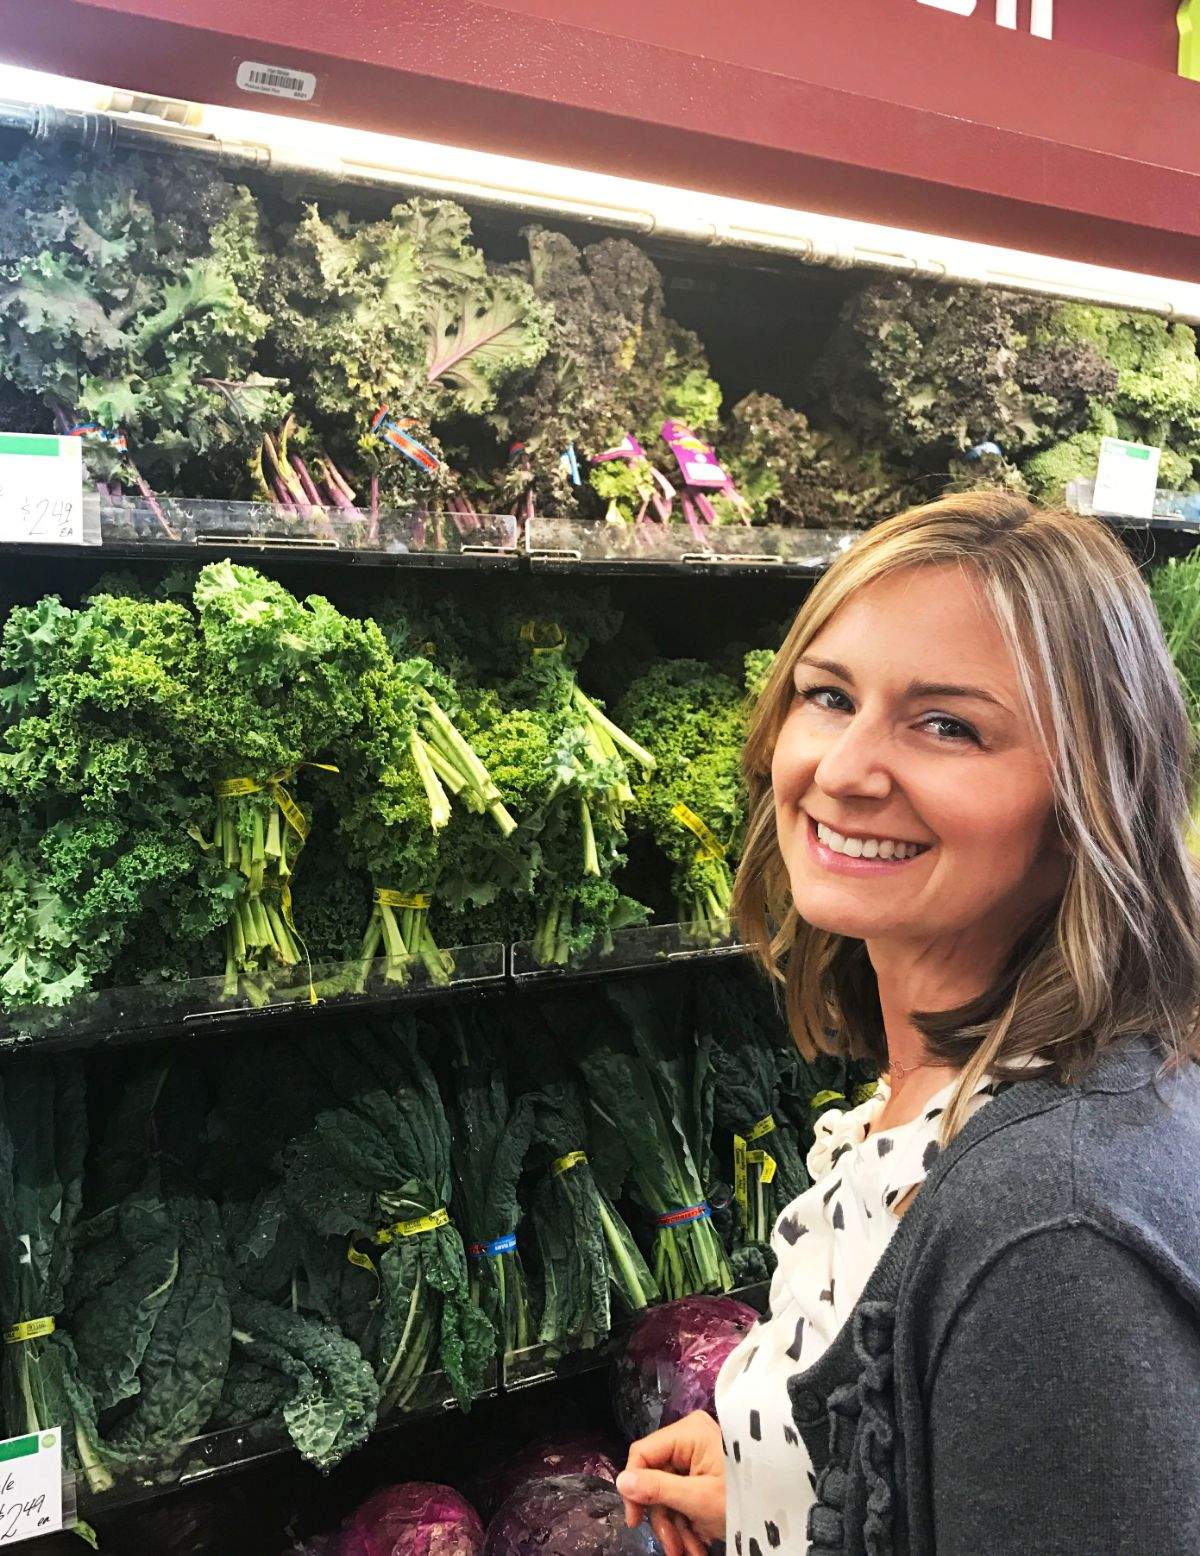 Megan Carpenter standing in front of green produce at the grocery store